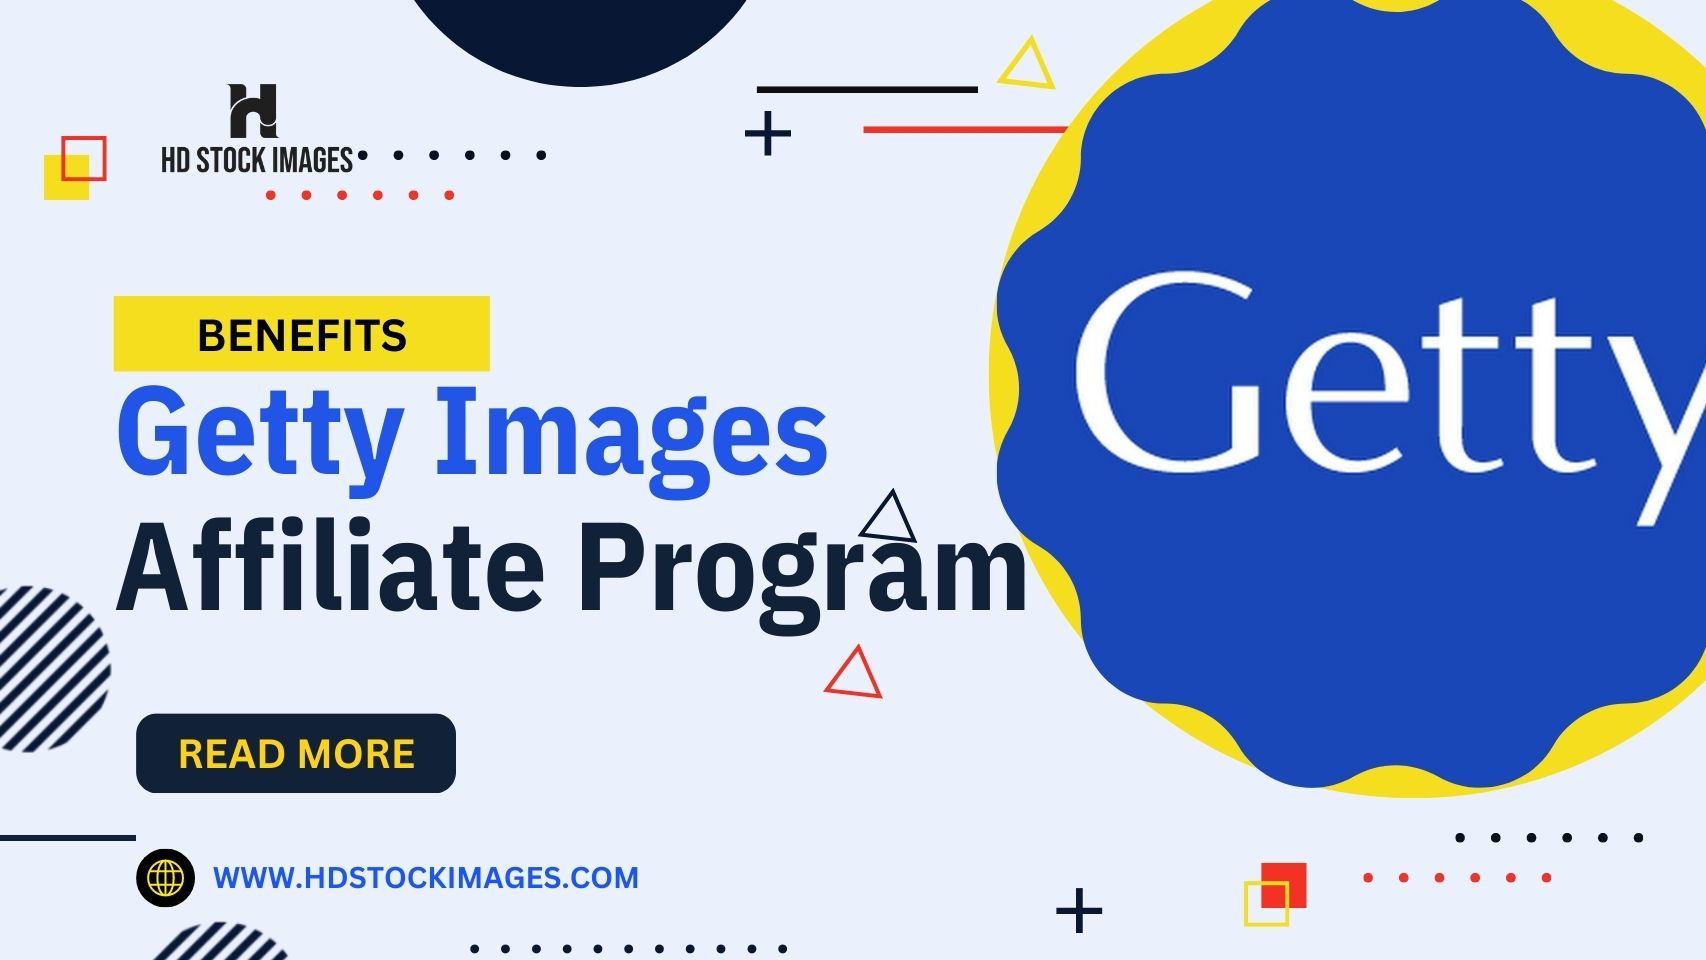 An image of Getty Image Affiliate Program